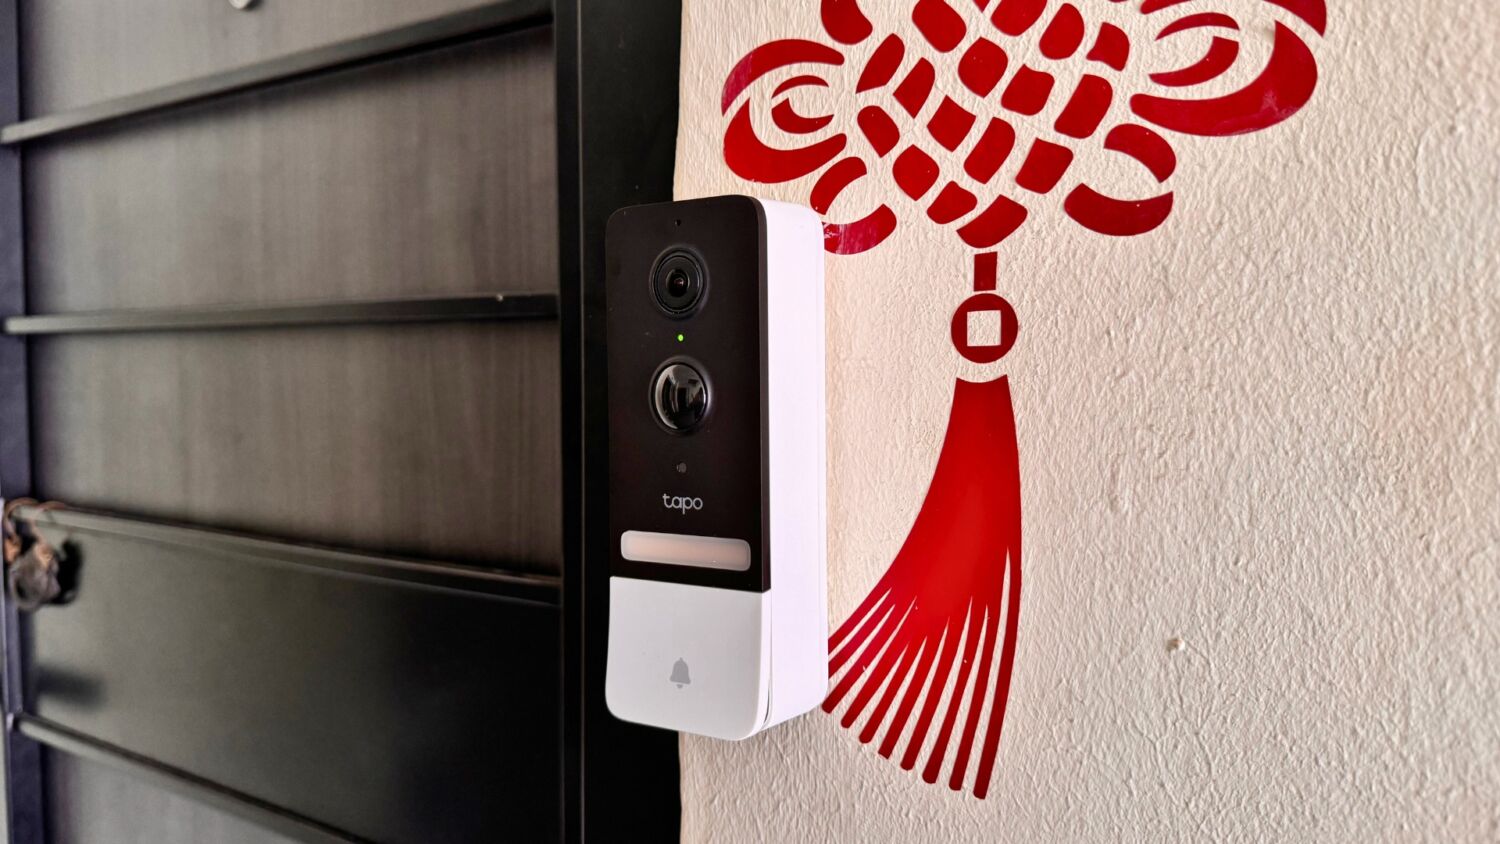 Doorbell switch to use with tapo hub/chime : r/smarthome